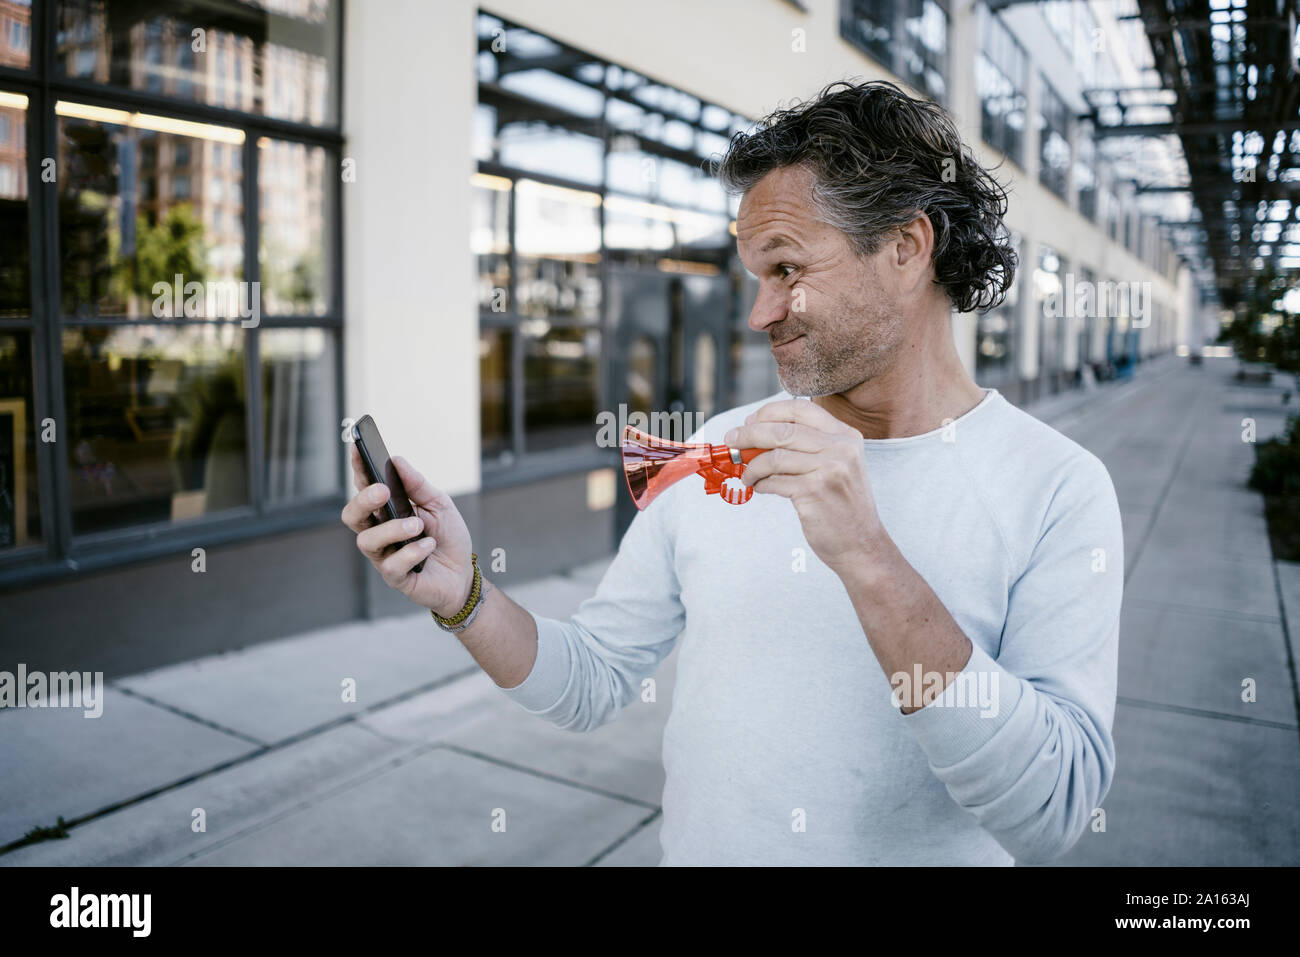 Portrait of mature man with horn and smartphone Stock Photo